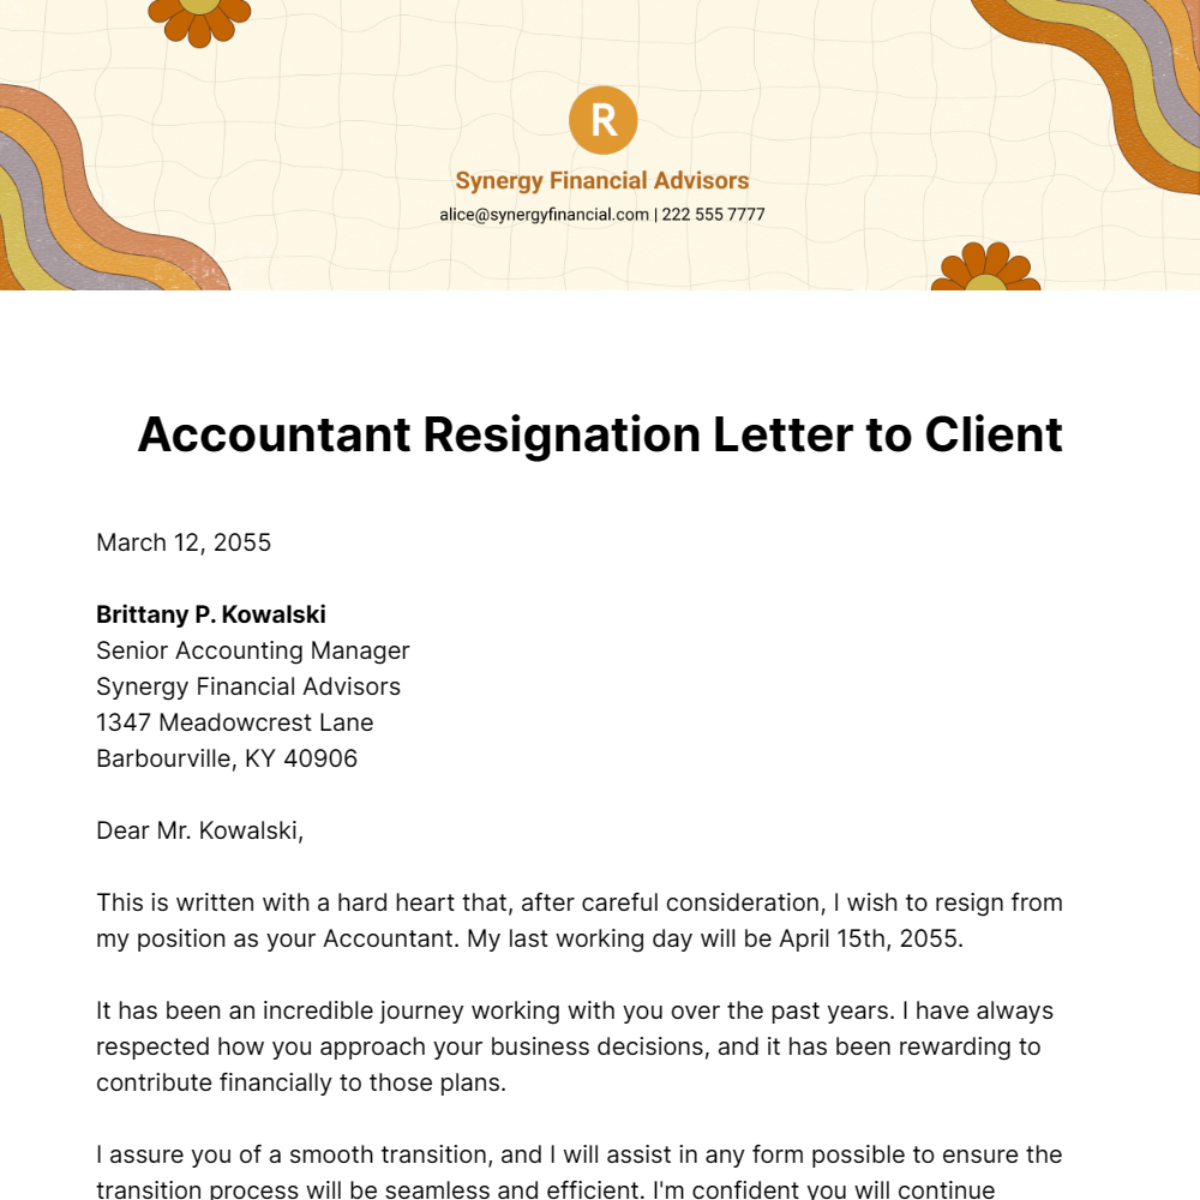 Accountant Resignation Letter to Client Template